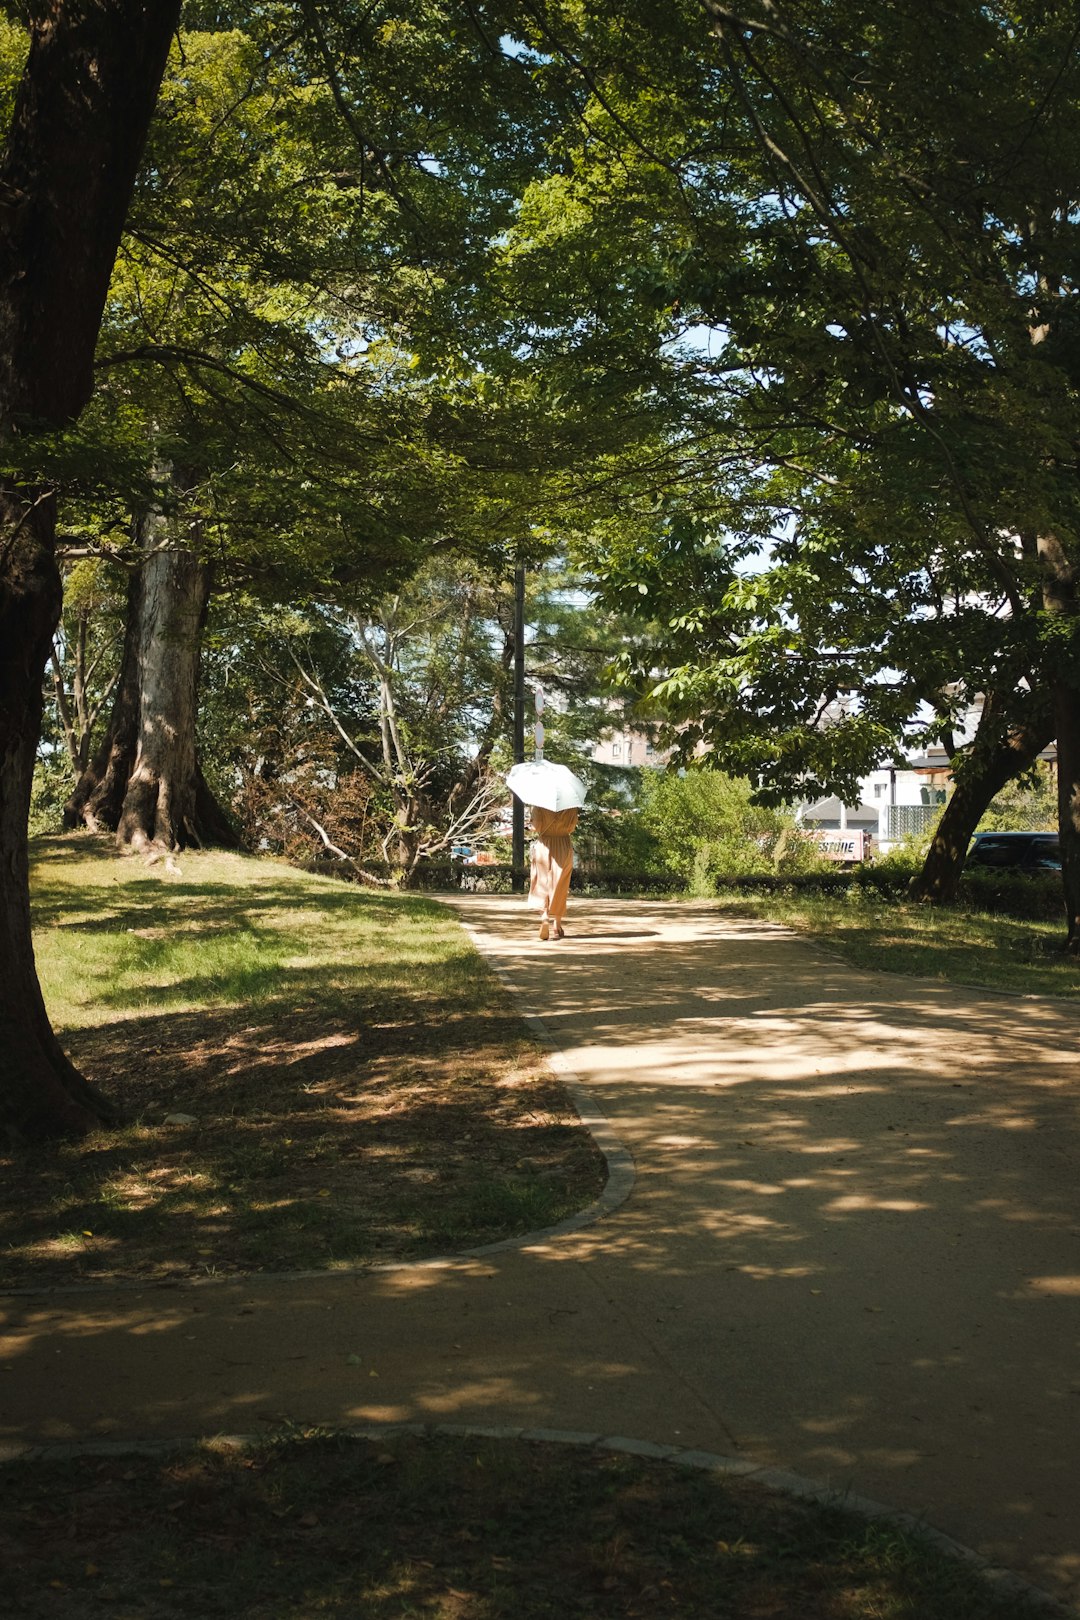 woman in white dress walking on pathway between green trees during daytime